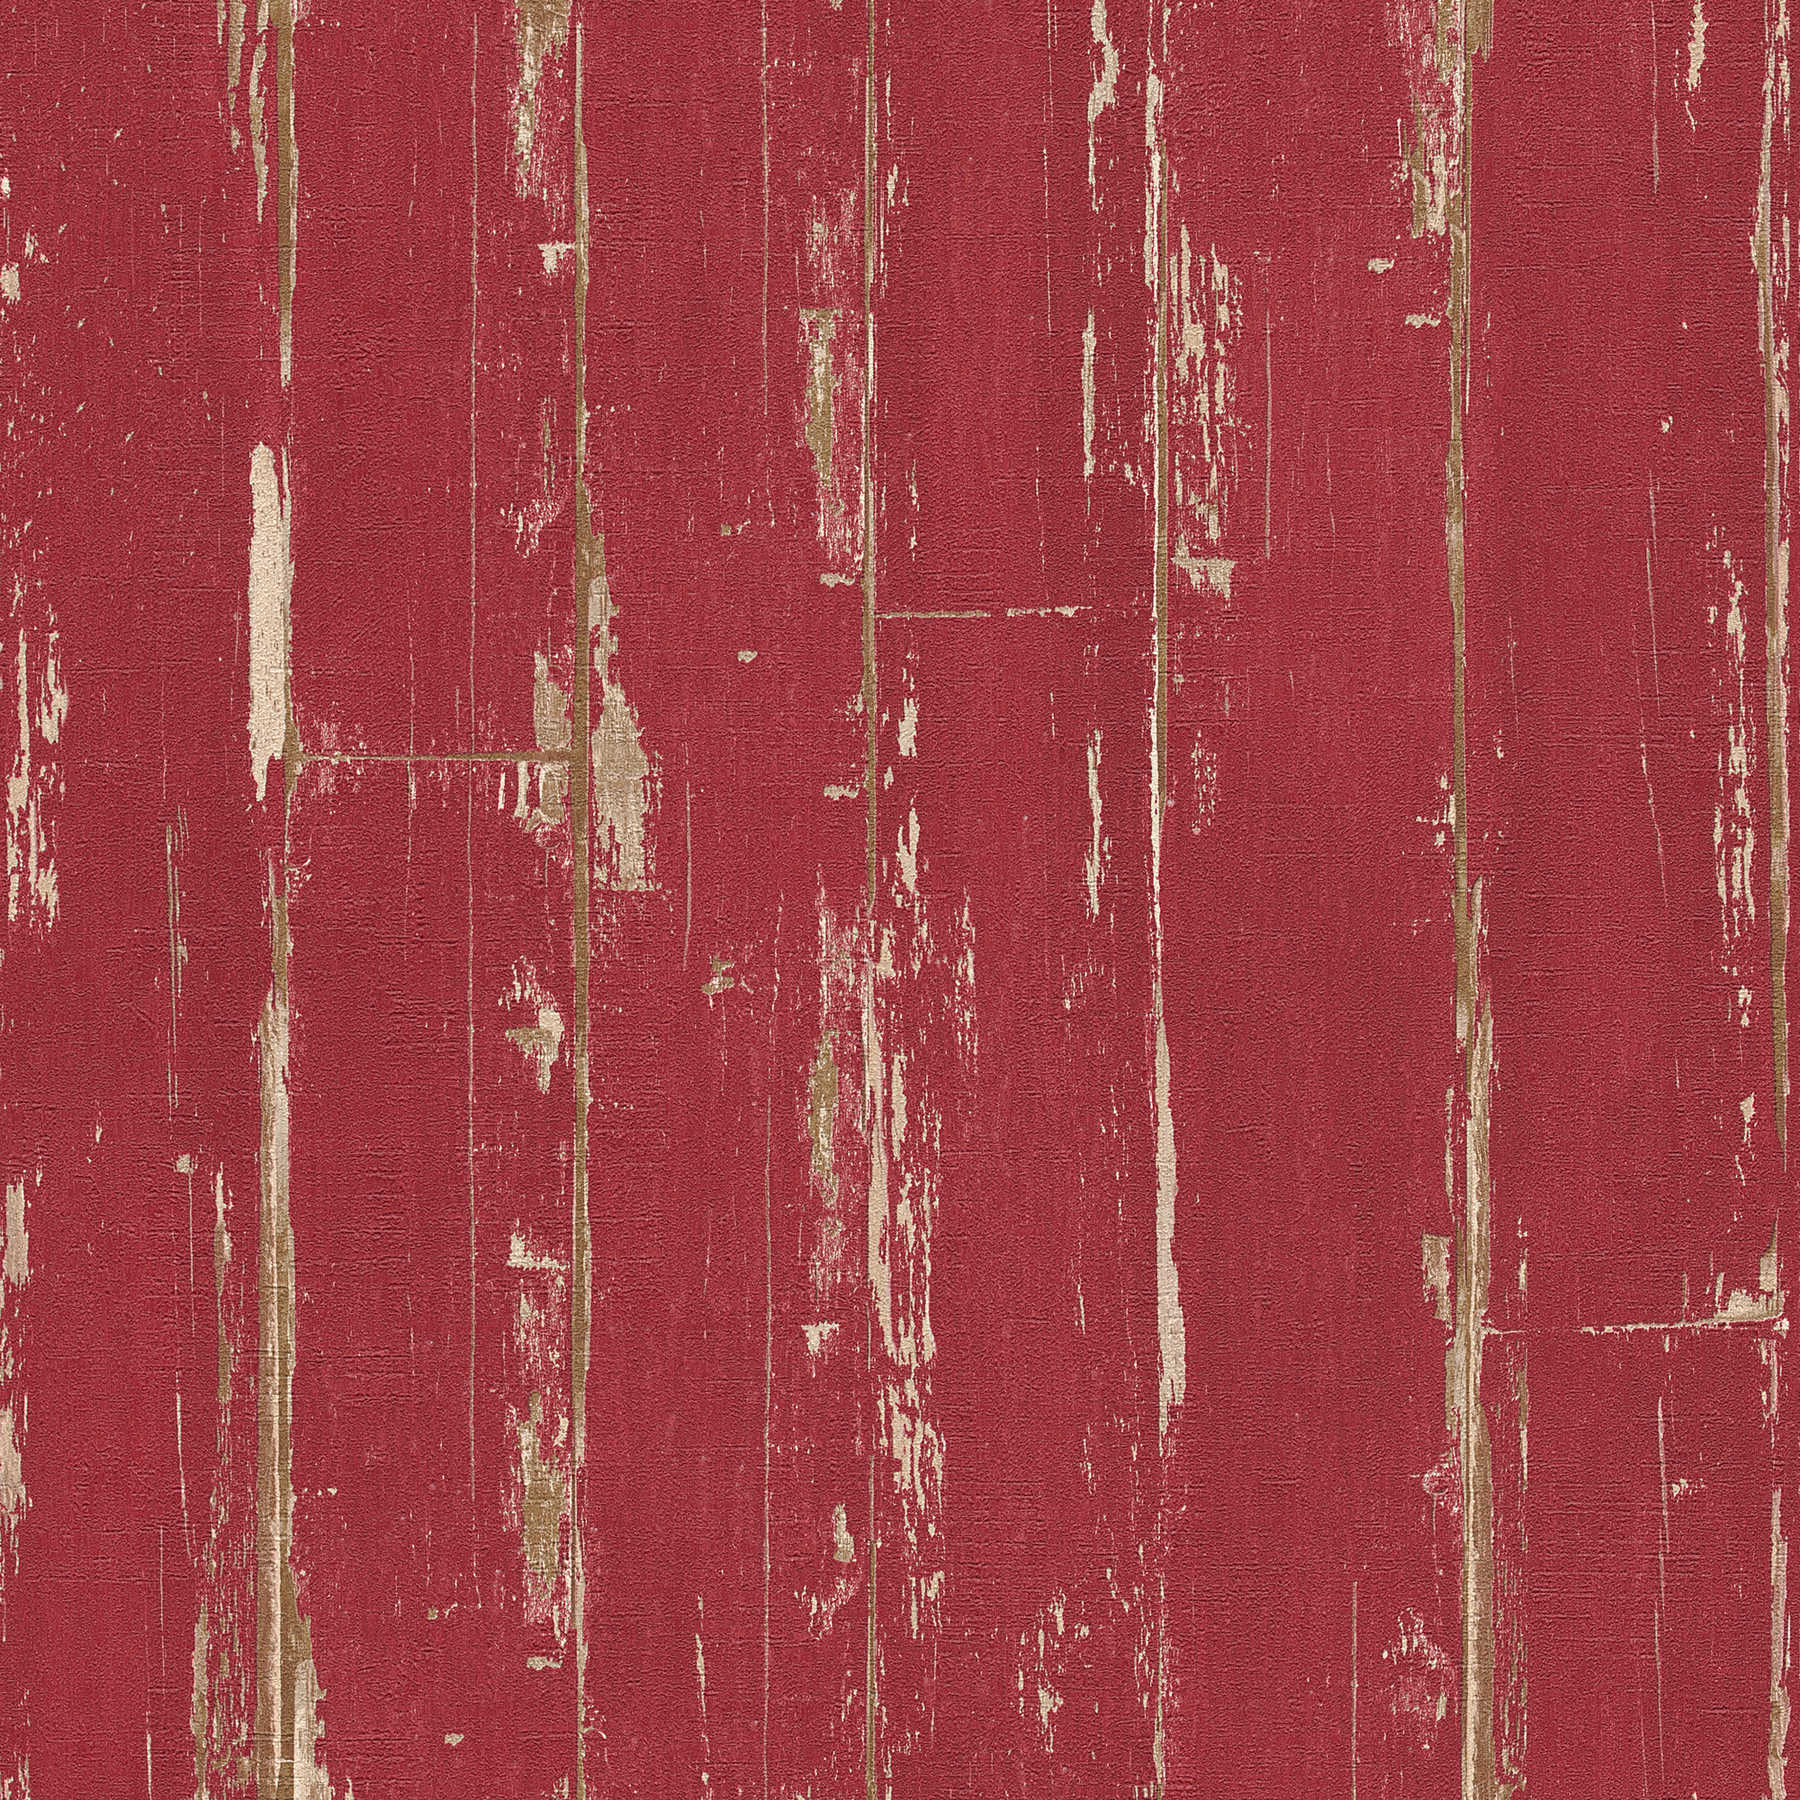         Wooden wallpaper with boards, vintage look & used look - red
    